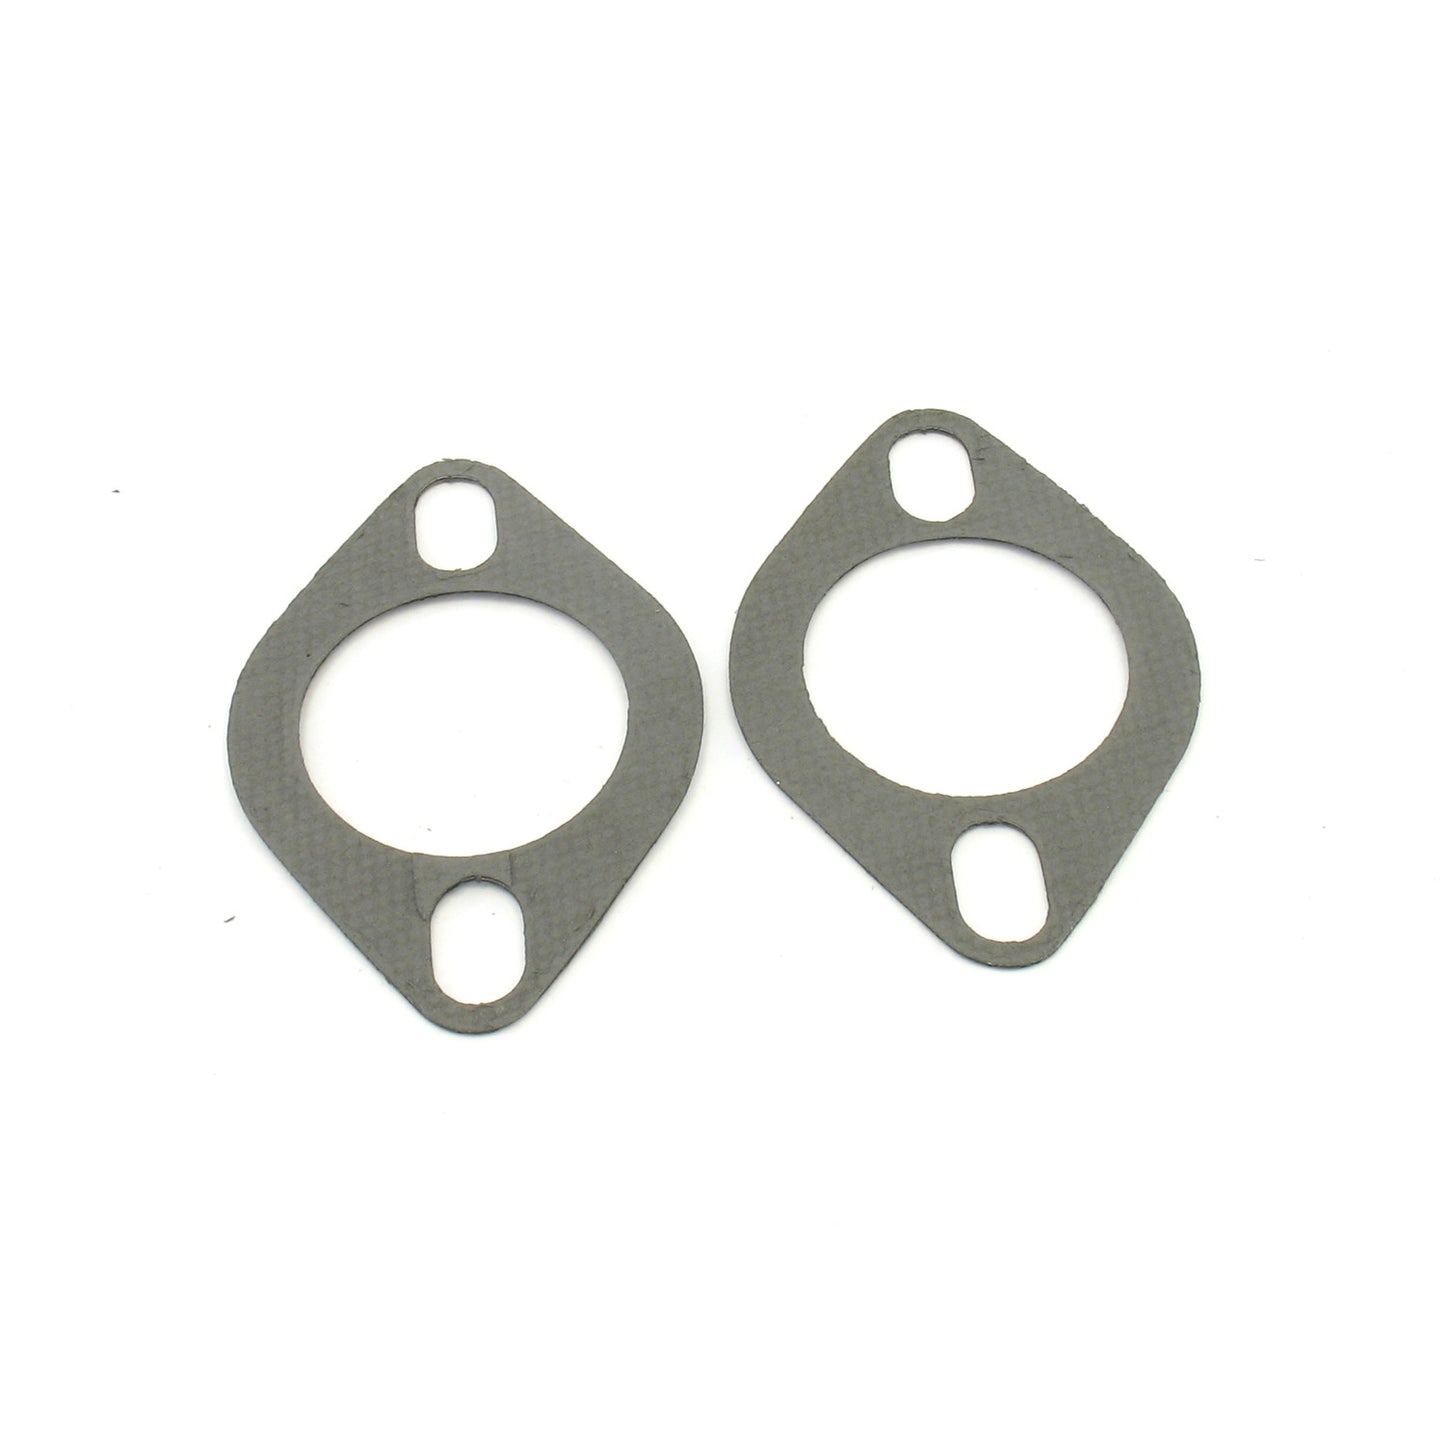 Patriot Exhaust H7952 2-bolt 2 1/2" collector gaskets